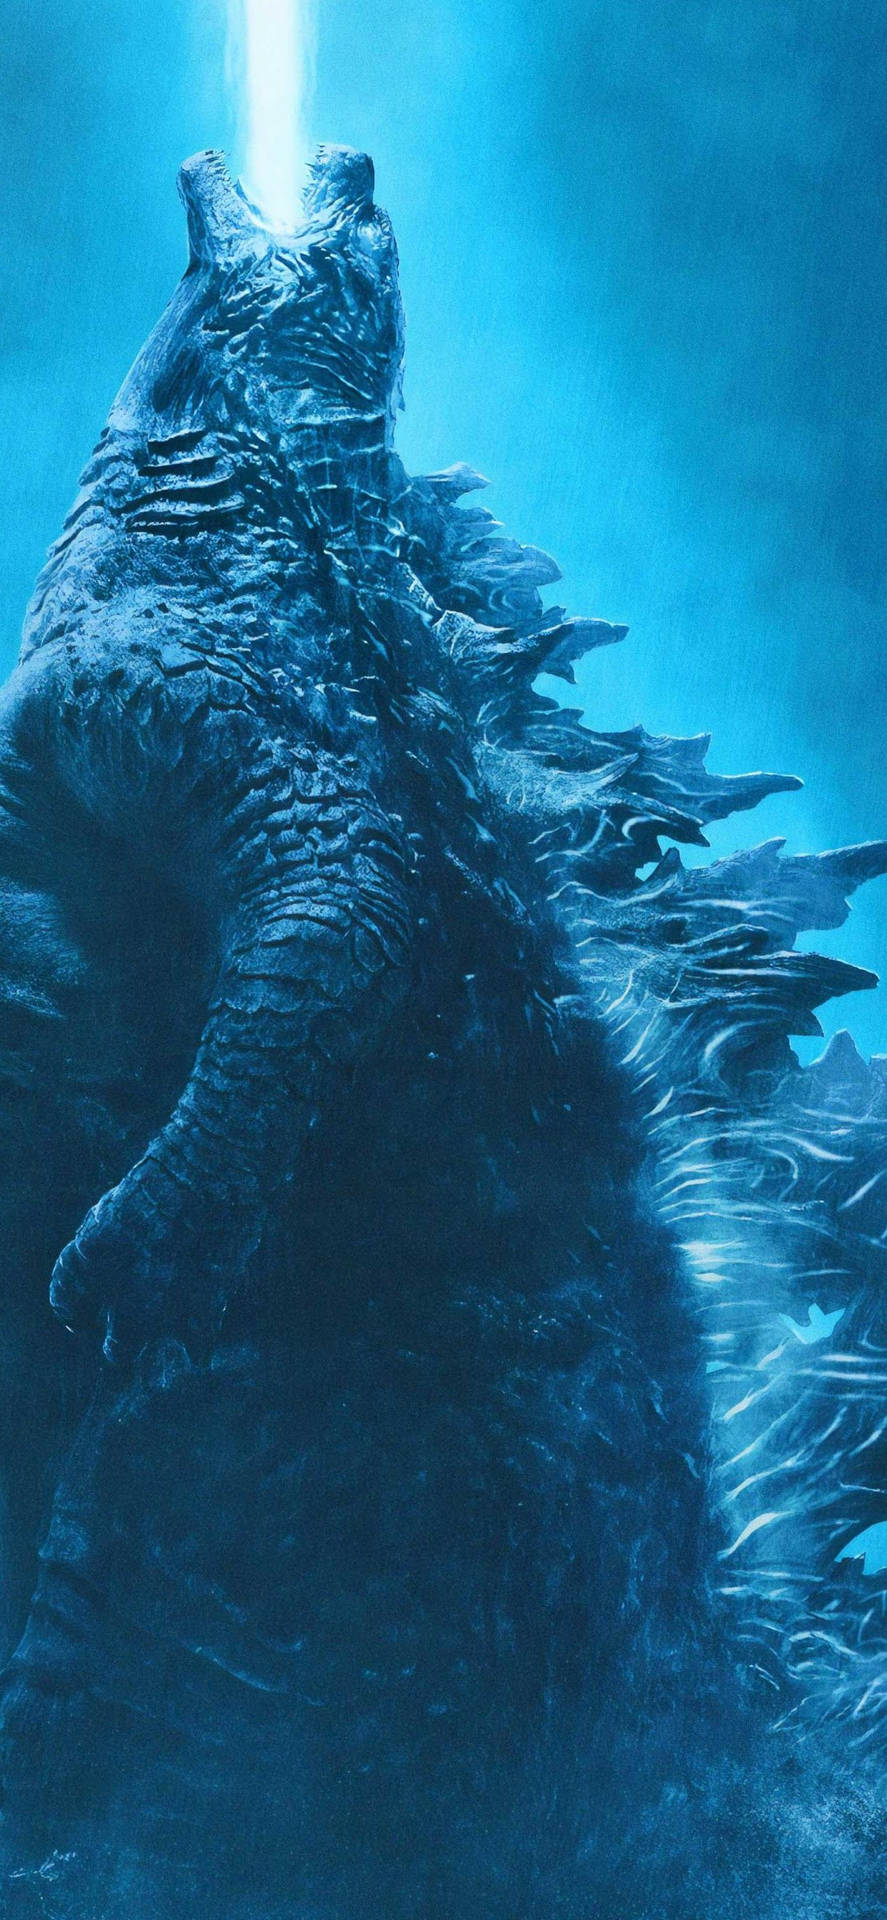 Get ready to face the Atomic Breath of Godzilla, King of the Monsters! Wallpaper